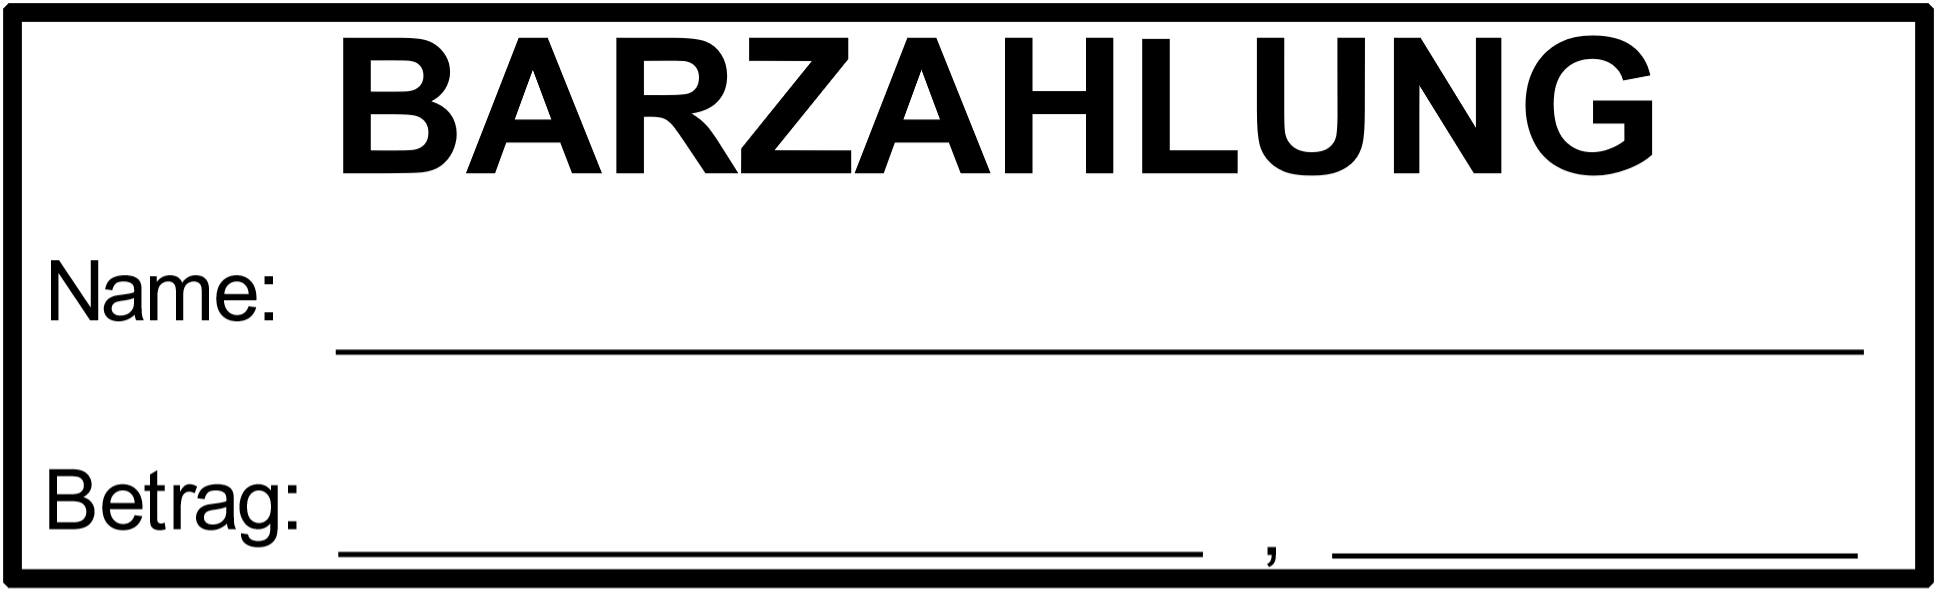 BARZAHLUNG